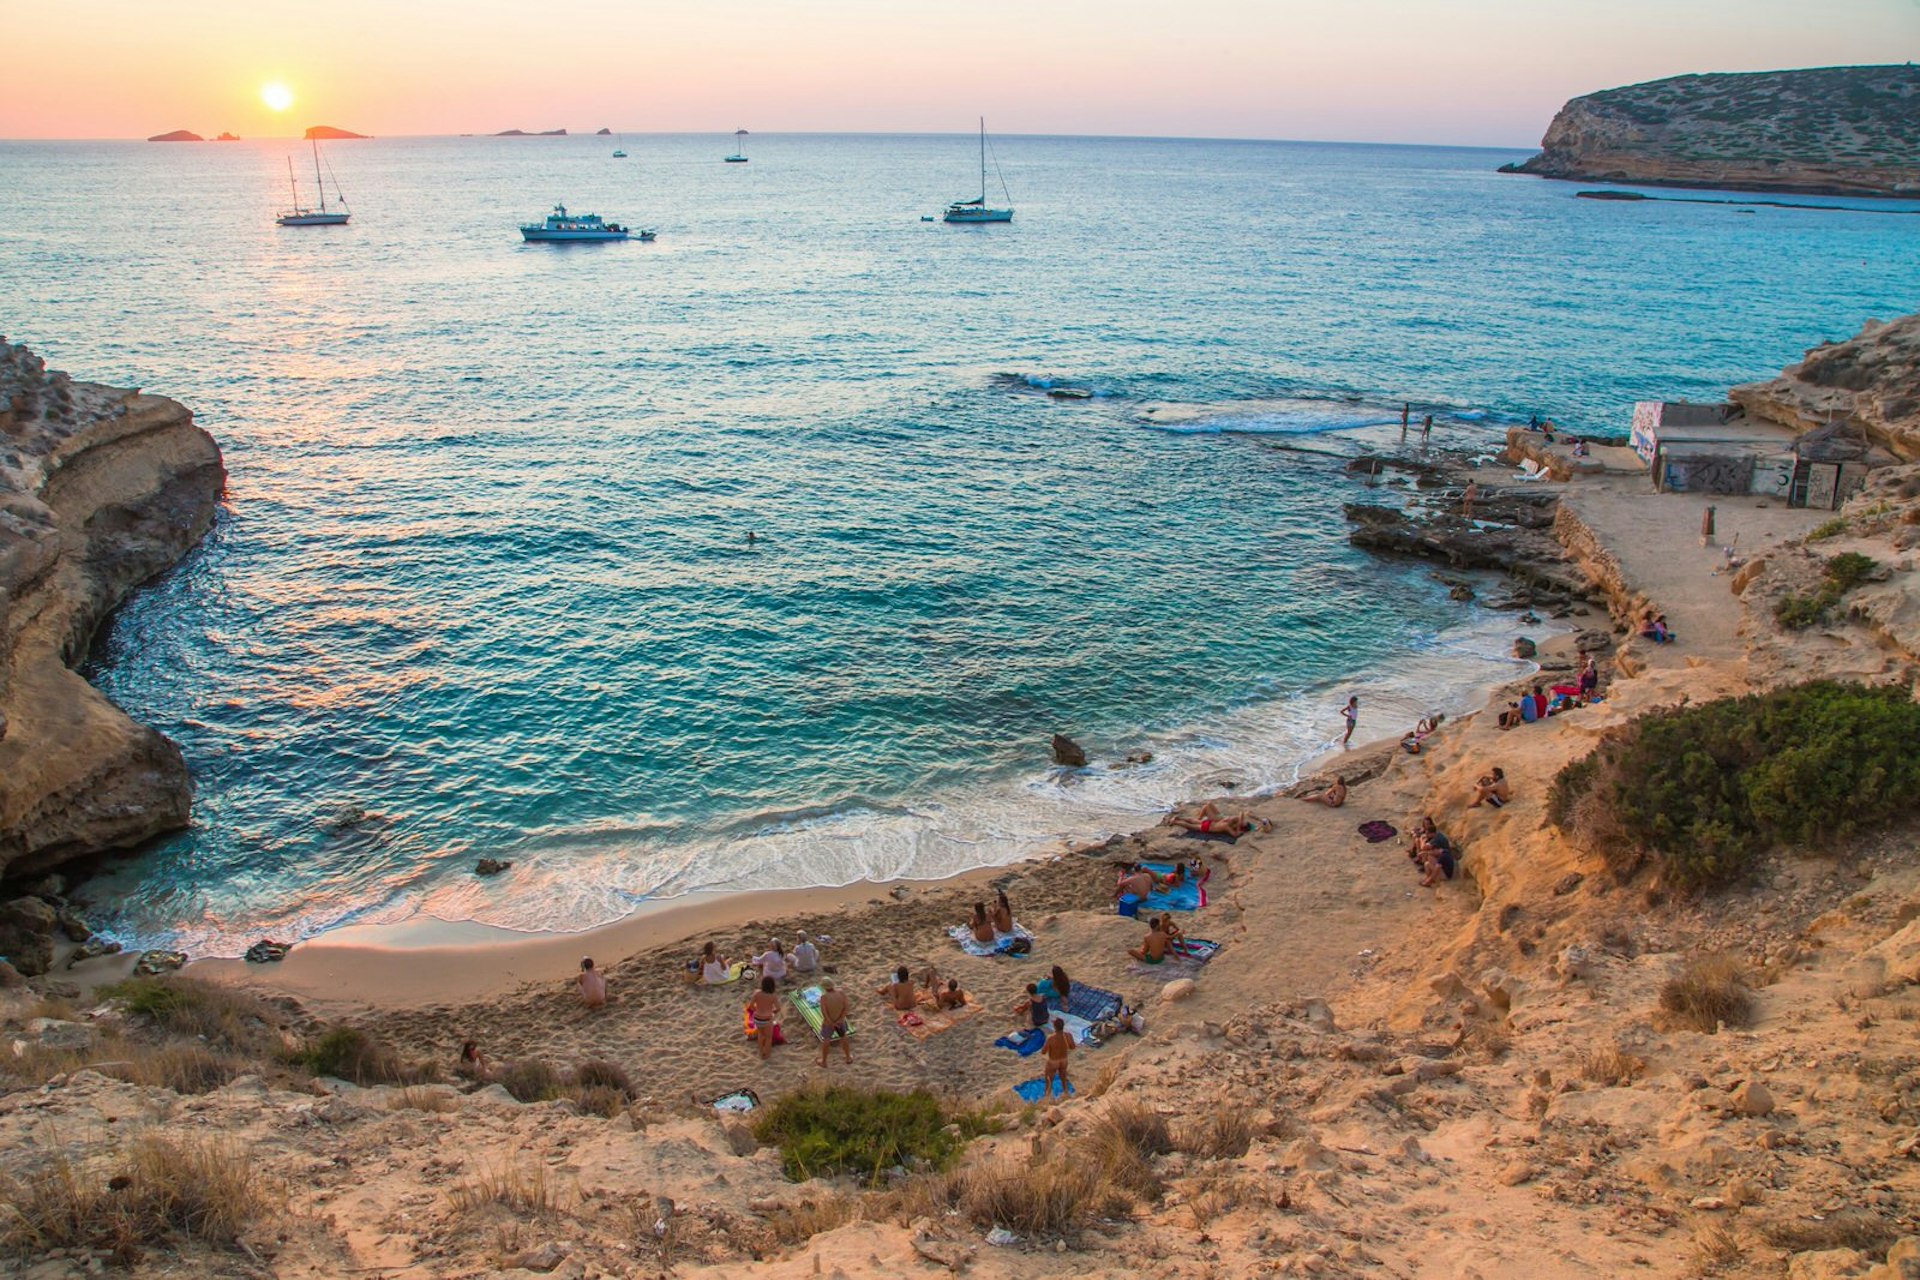 People line the sand at Cala Compte beach, Ibiza. A number of people sit on coloured towels while a couple swim in the sea. The sun sets in the background.